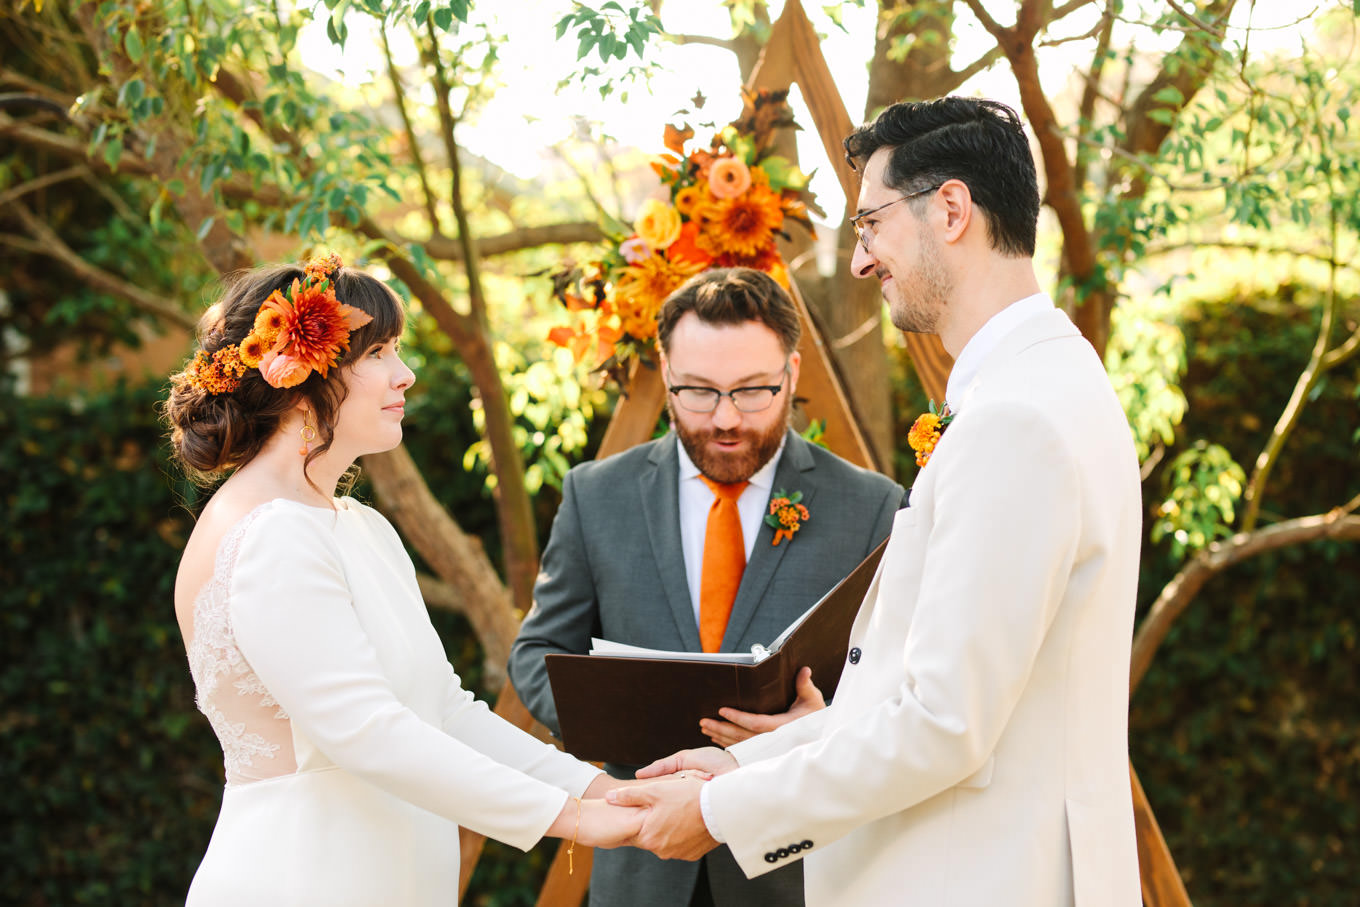 Close up of bride and groom with officiant| Vibrant backyard micro wedding featured on Green Wedding Shoes | Colorful LA wedding photography | #losangeleswedding #backyardwedding #microwedding #laweddingphotographer Source: Mary Costa Photography | Los Angeles